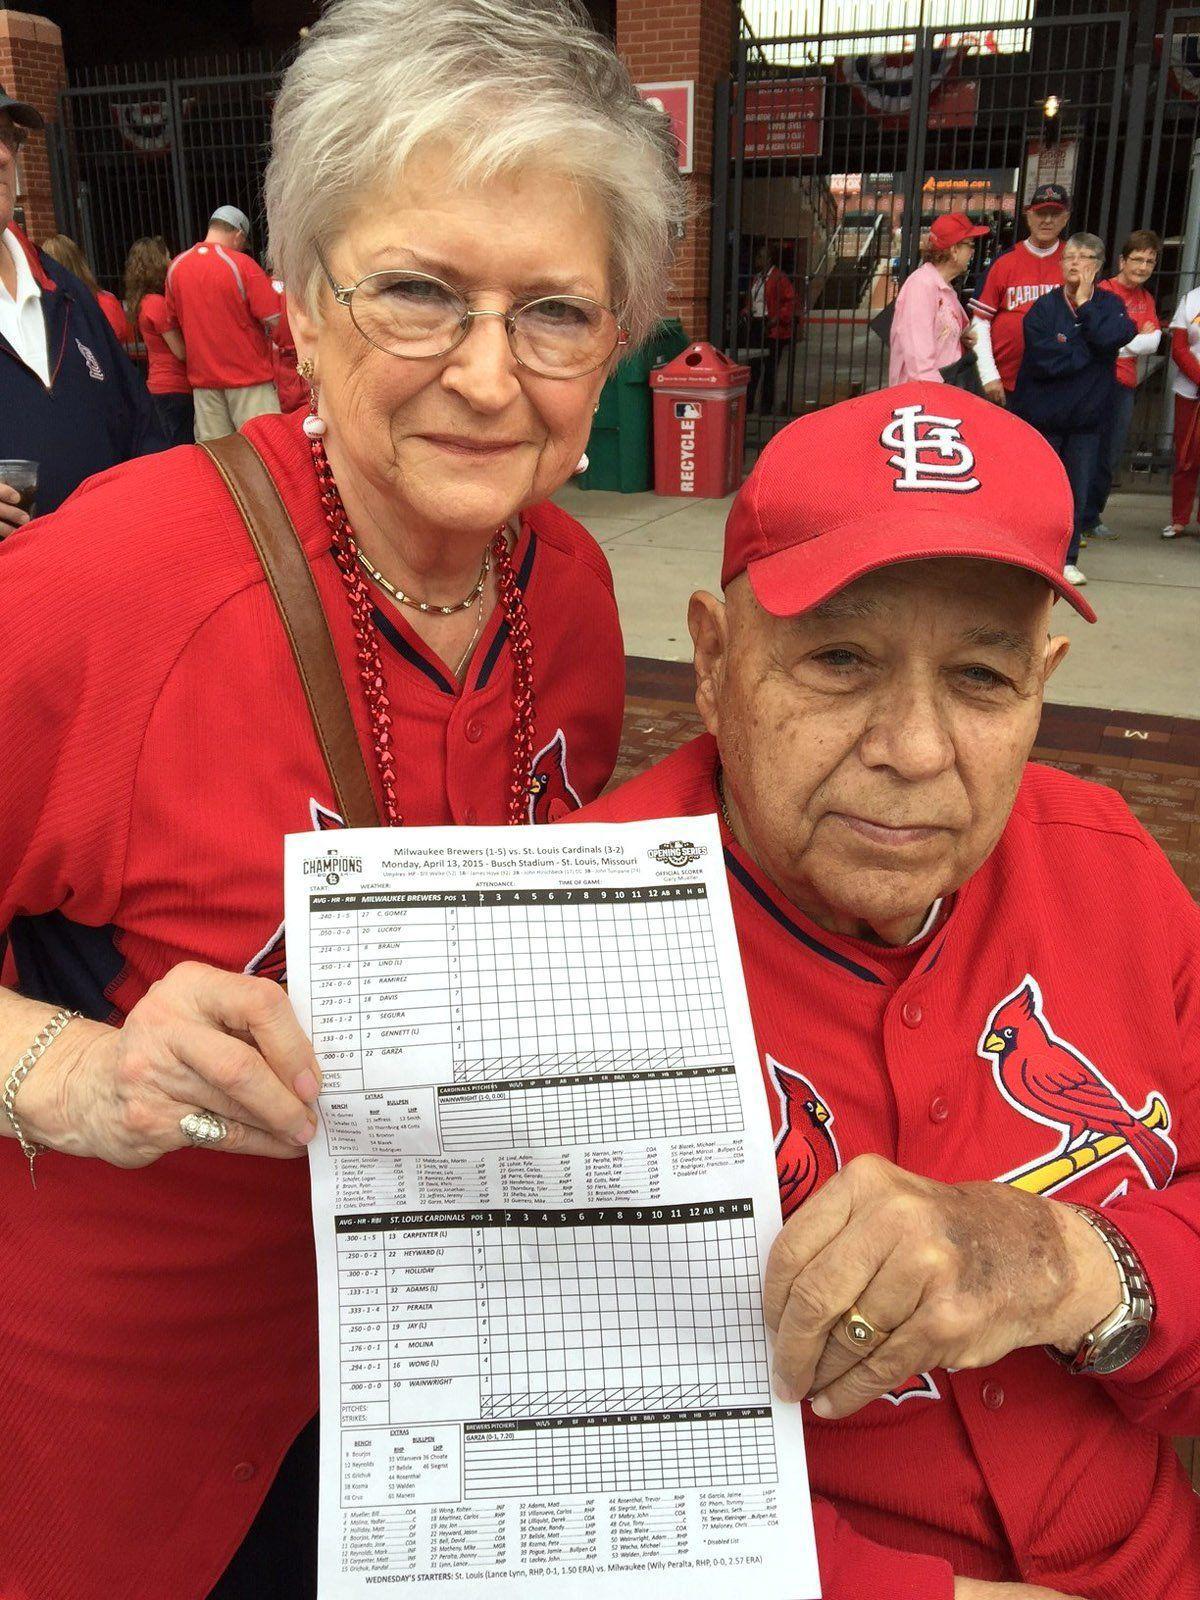 Fans come out for Cardinals' home opener